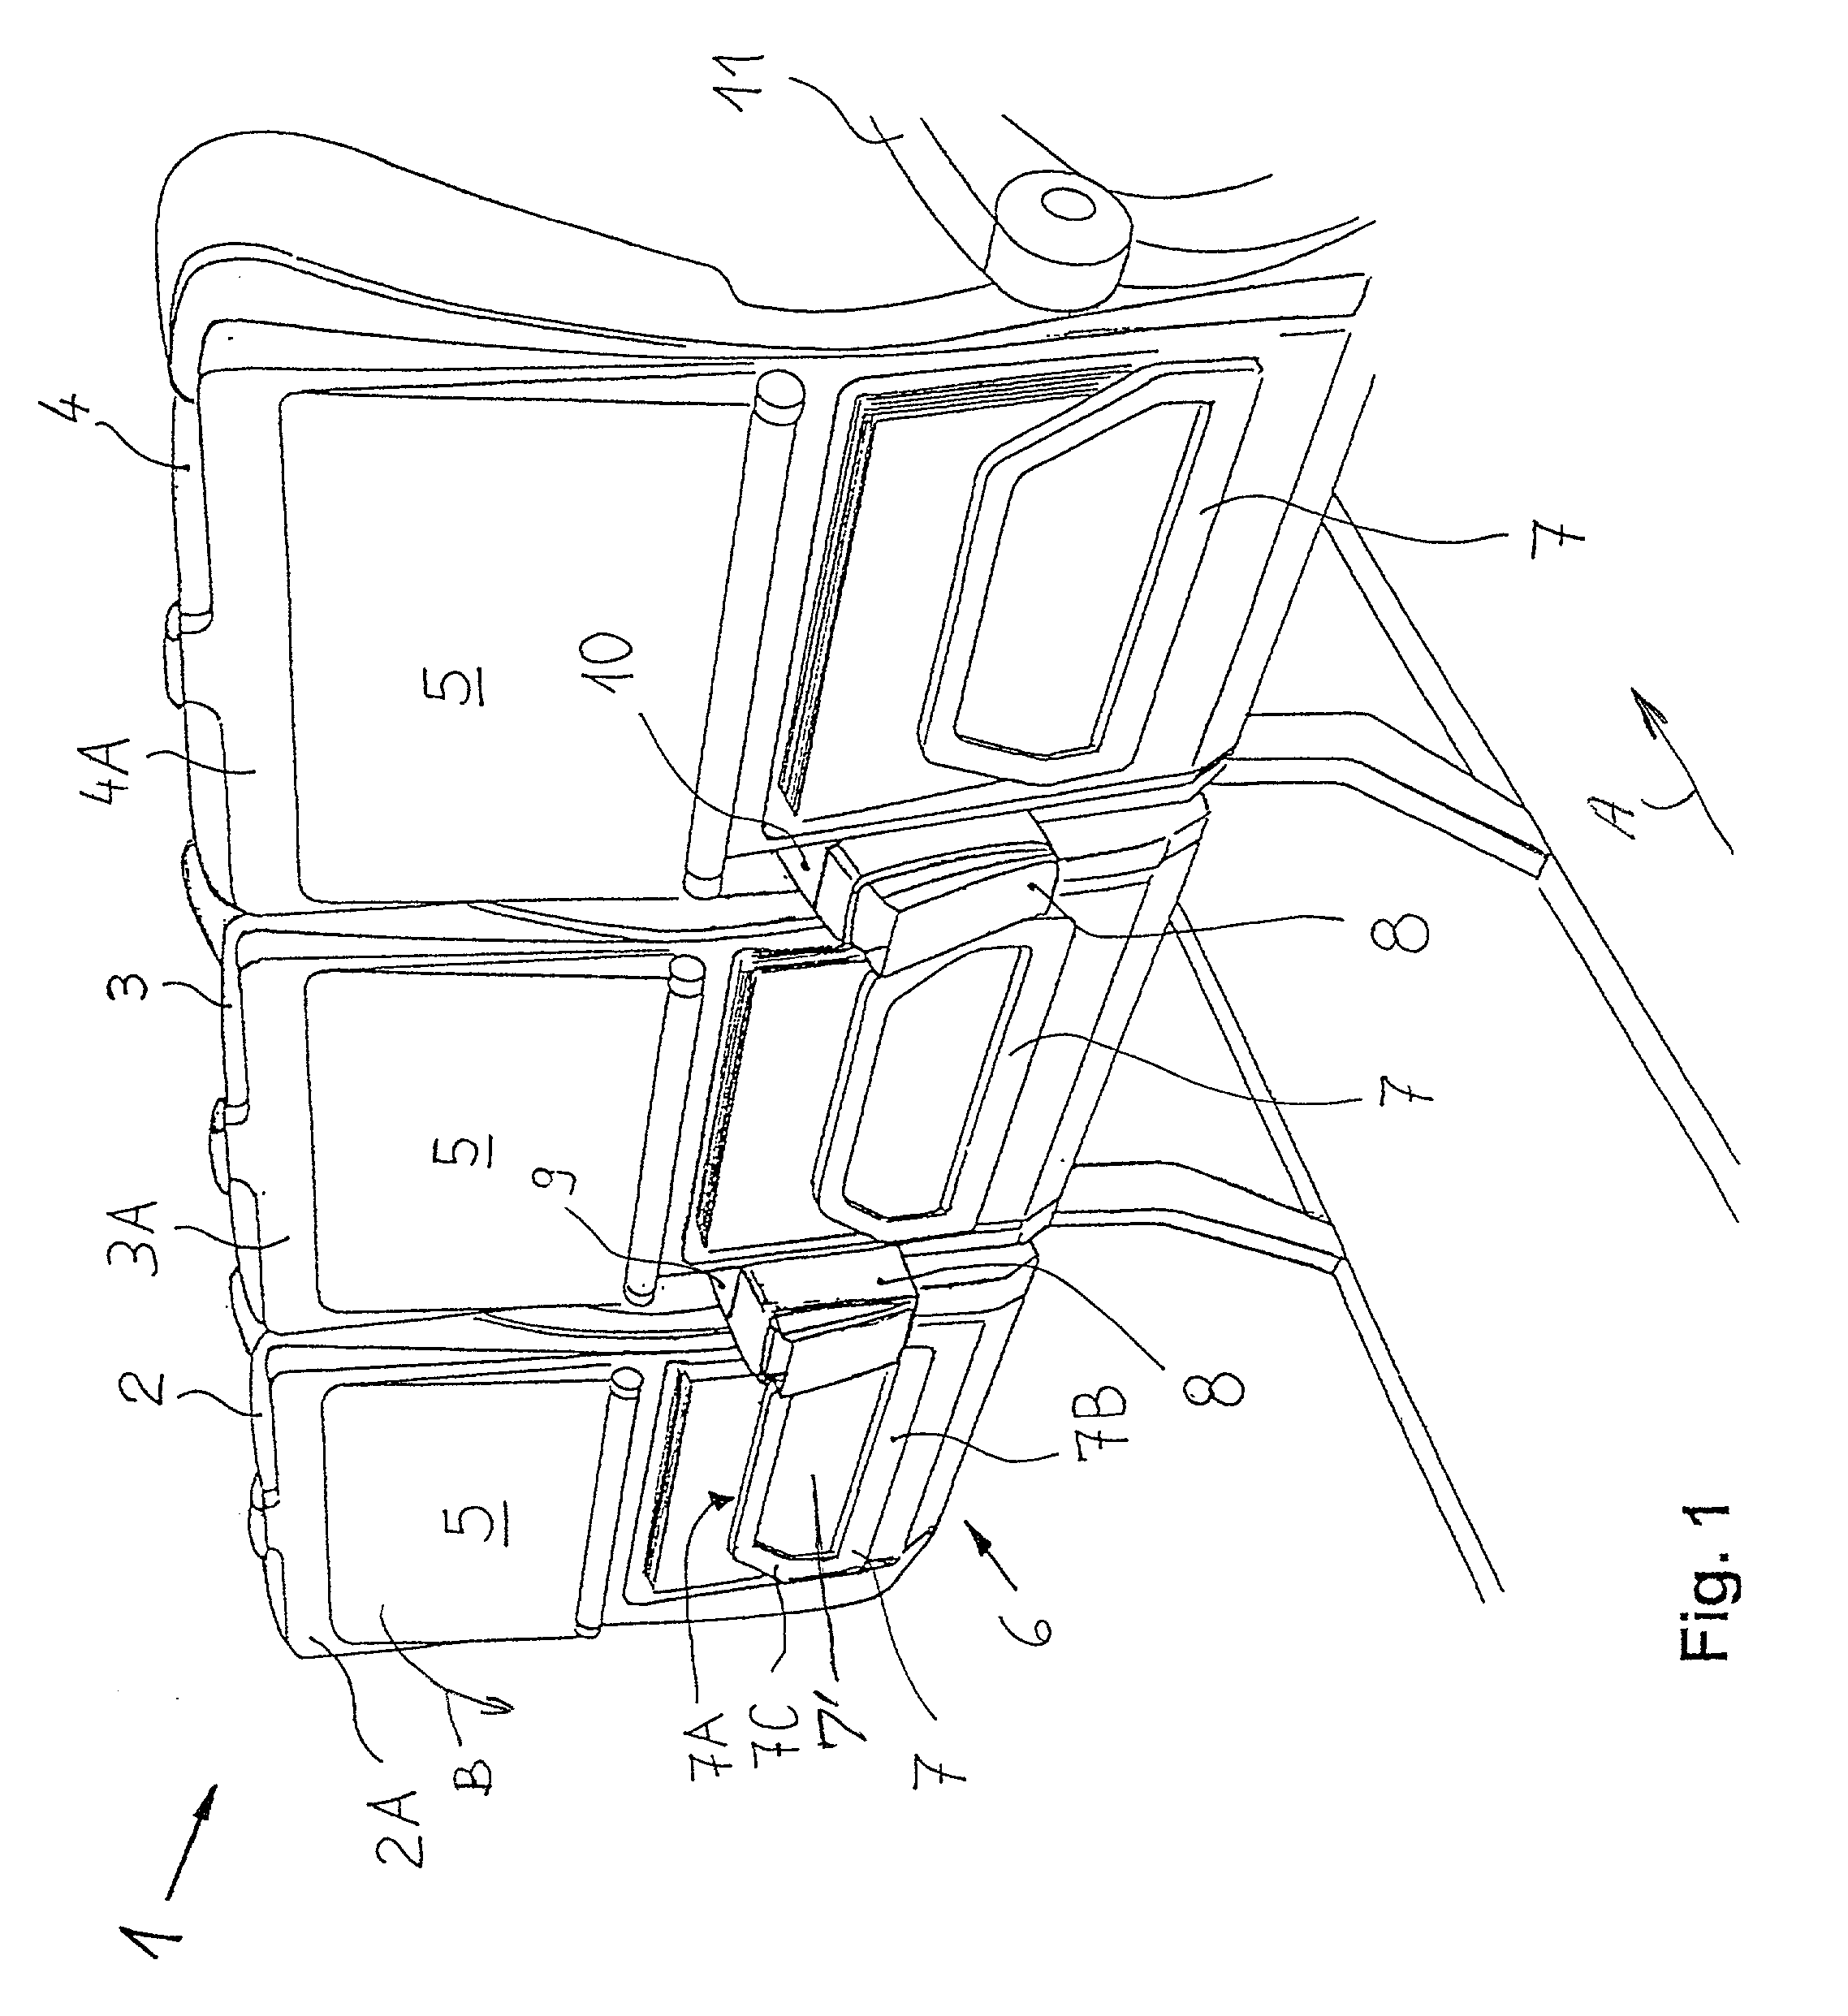 Passenger chair with a convenience device